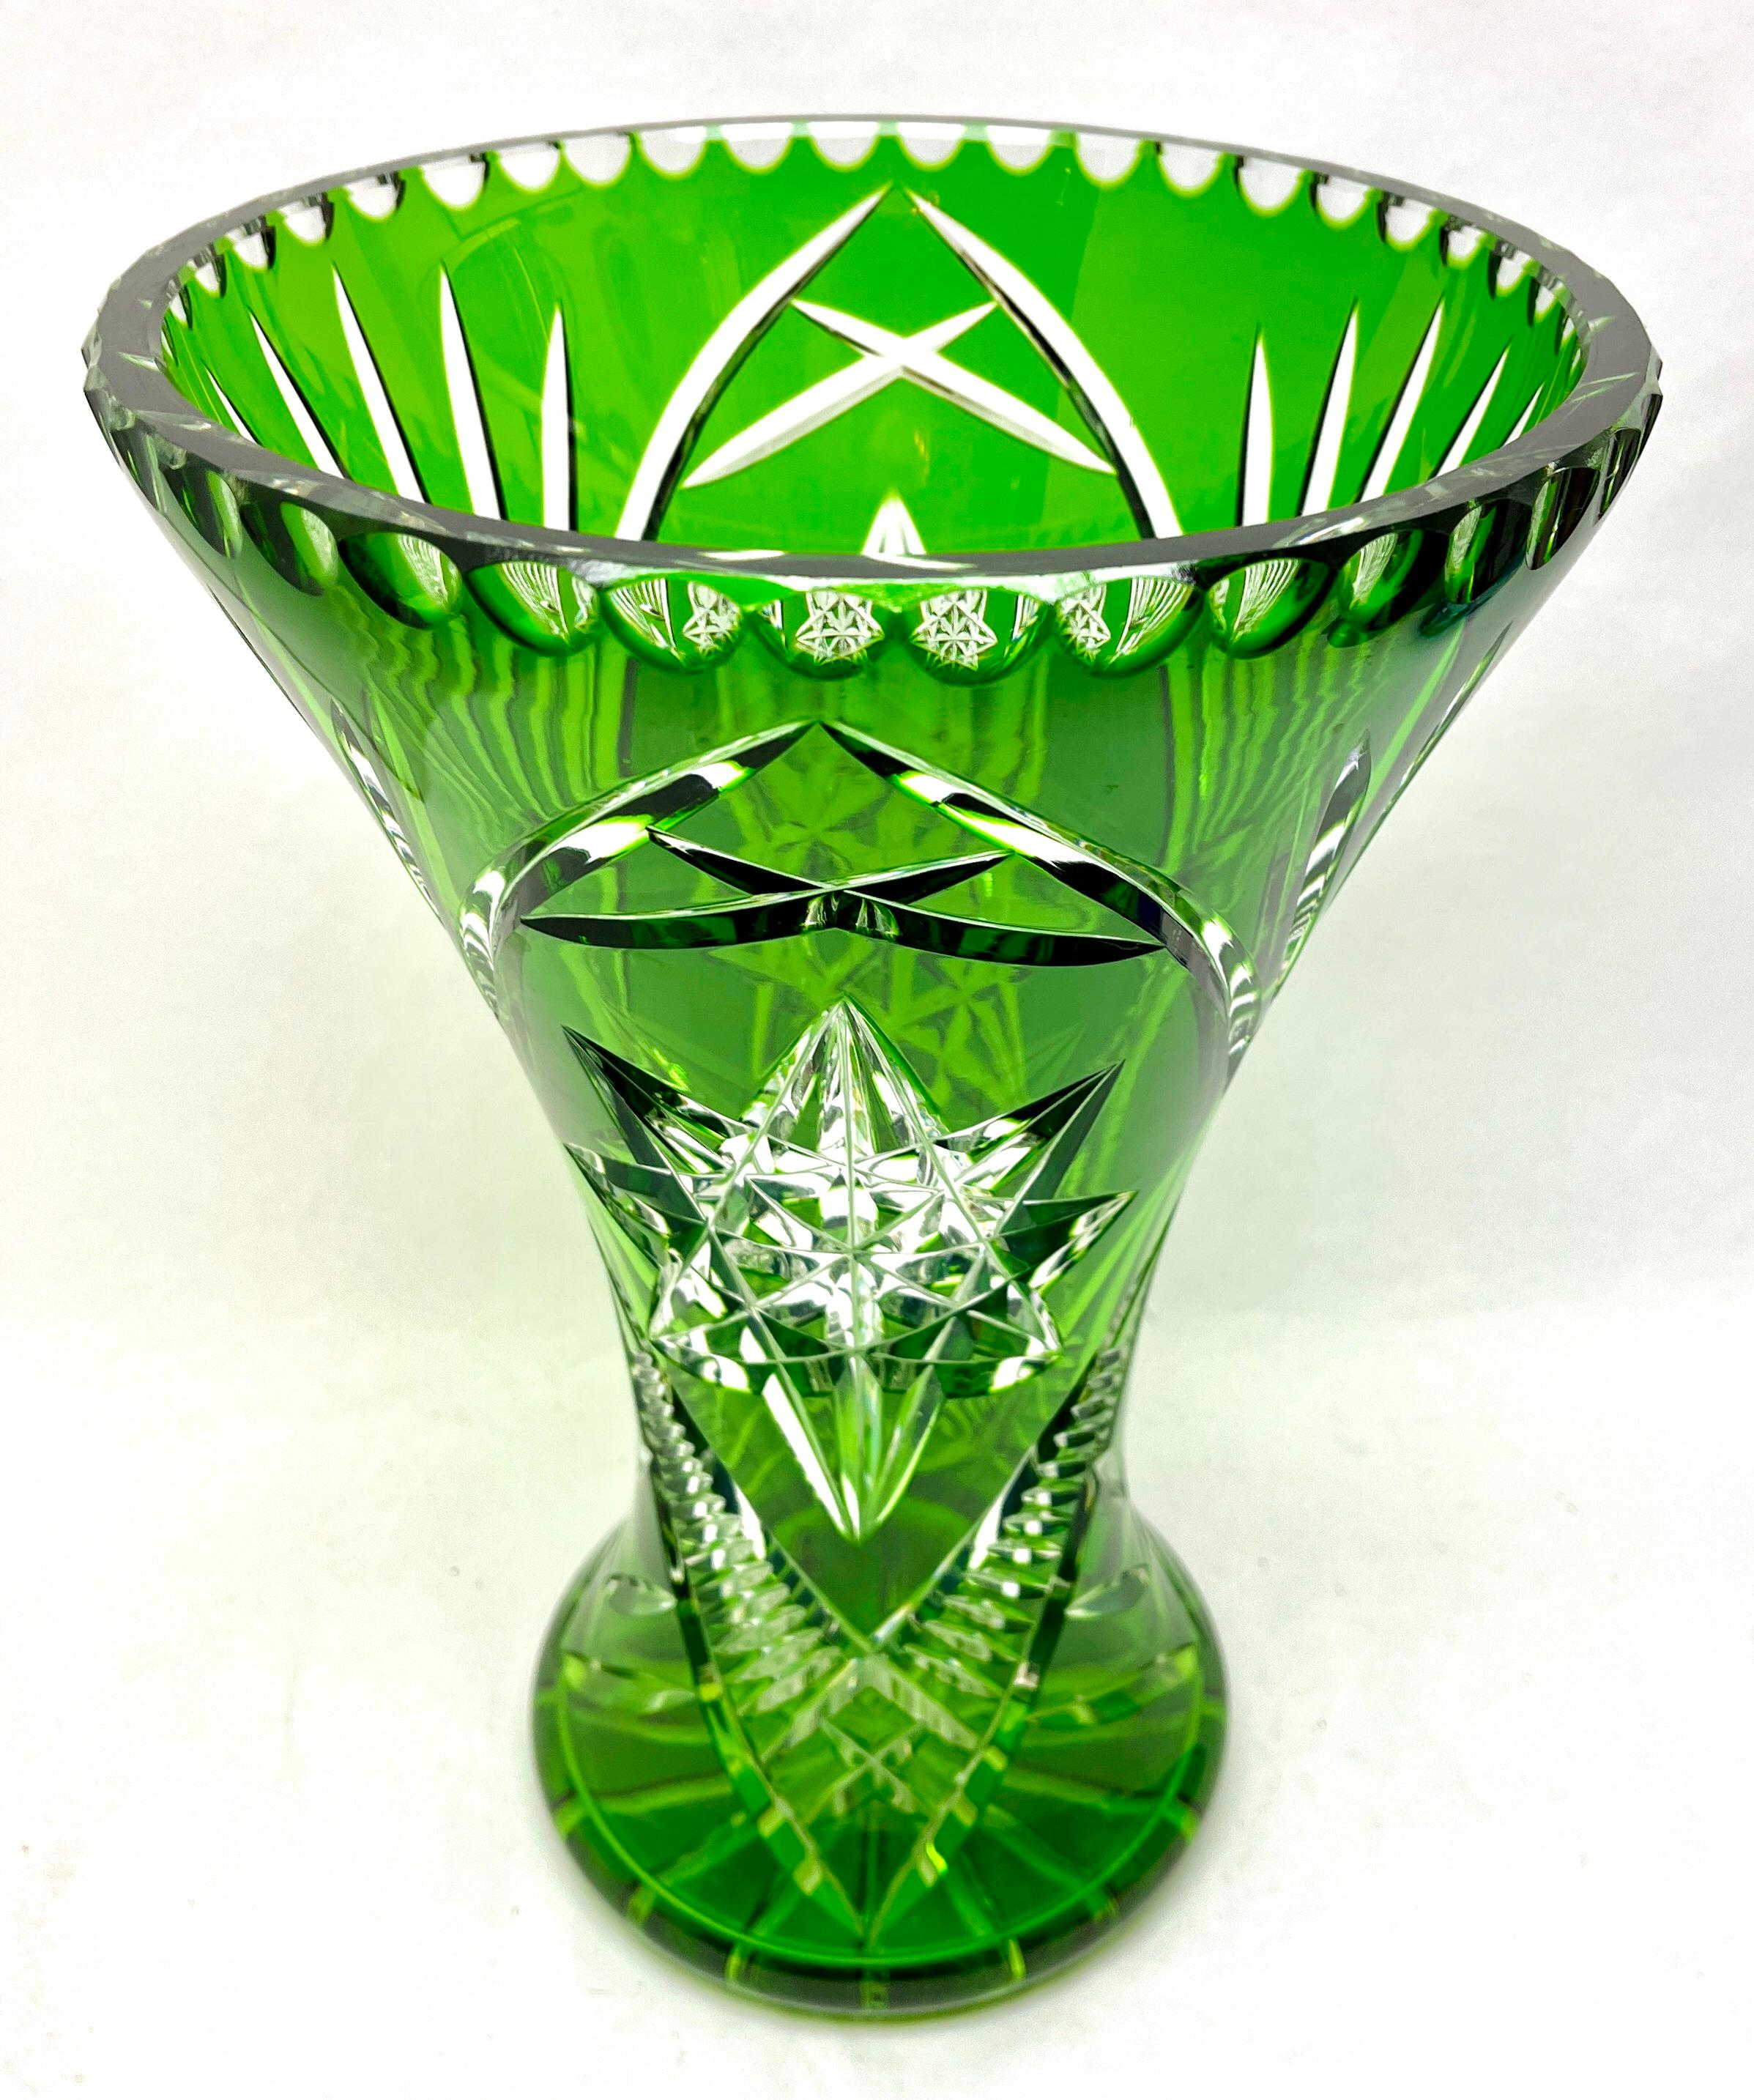 Vibrant, meadow-green cased-crystal glass vase in the Bohemian style with cut-to-clear decoration of palms and Stars. The body contains a good amount of water to keep the arrangement stable and blooming.

Weight Crystal 4.2 Kg / 9.25